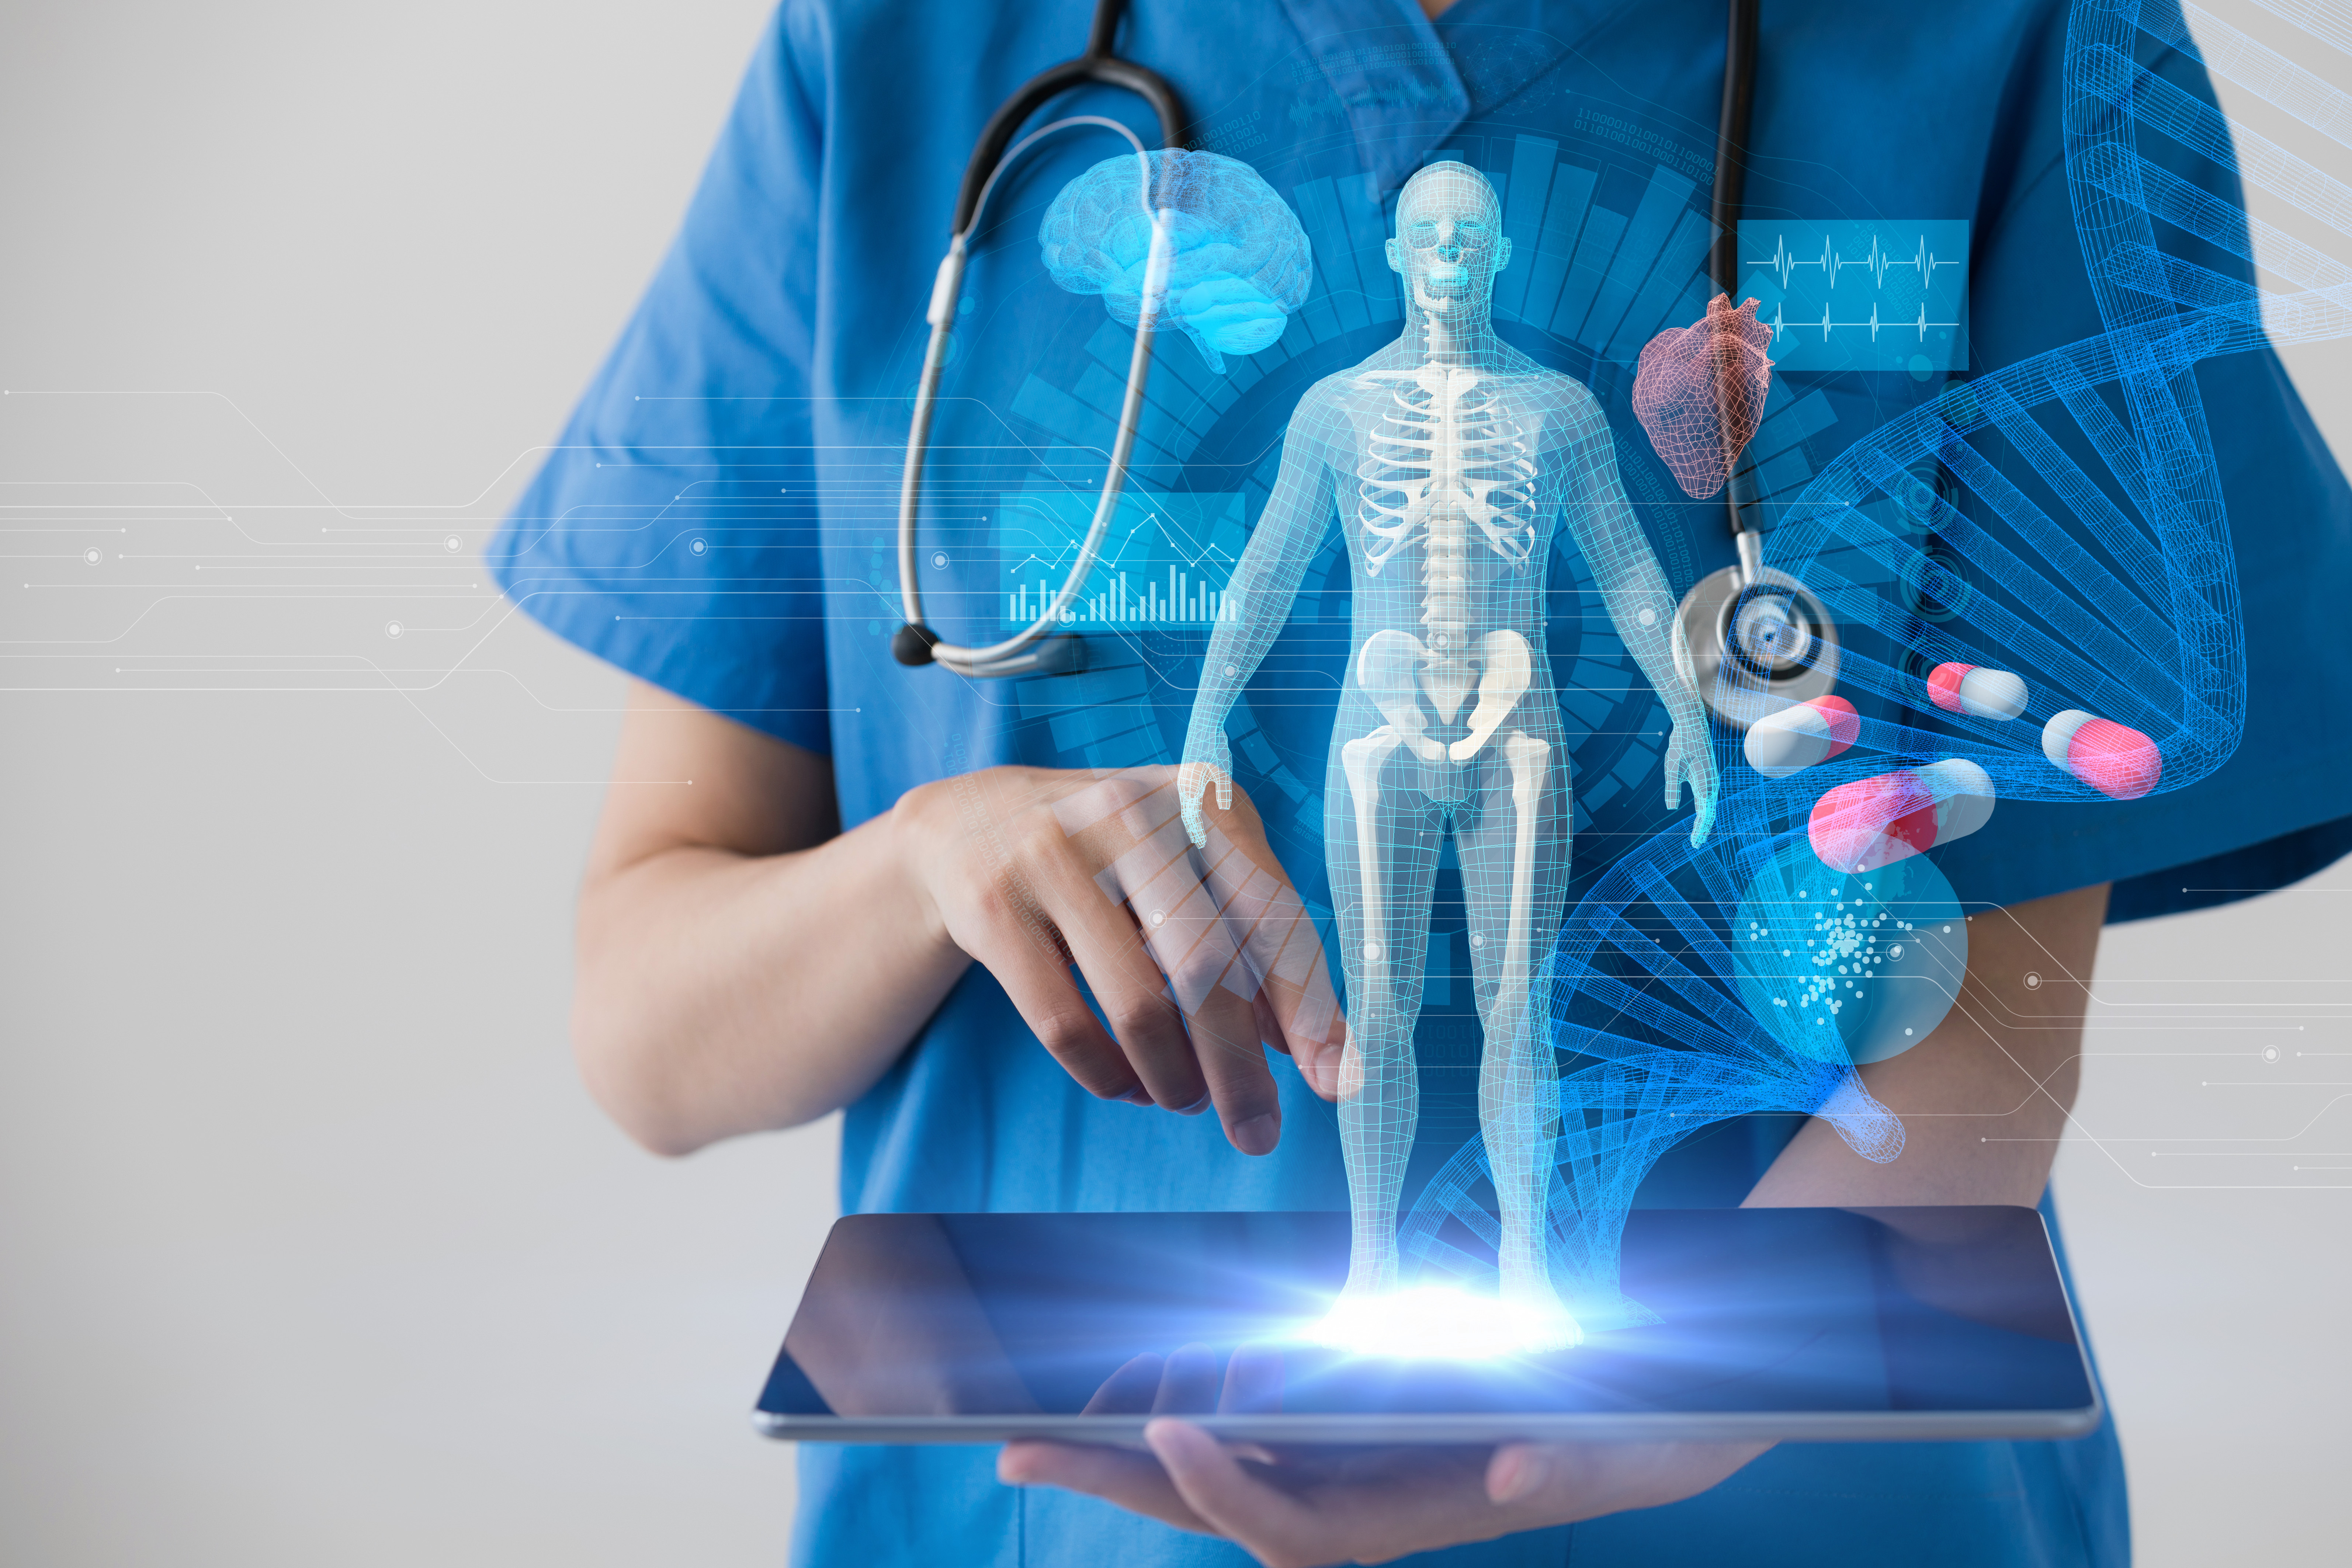 digital skeleton, pills, and DNA helix appears to pop off of a tablet being held by medical professional wearing a stethoscope.